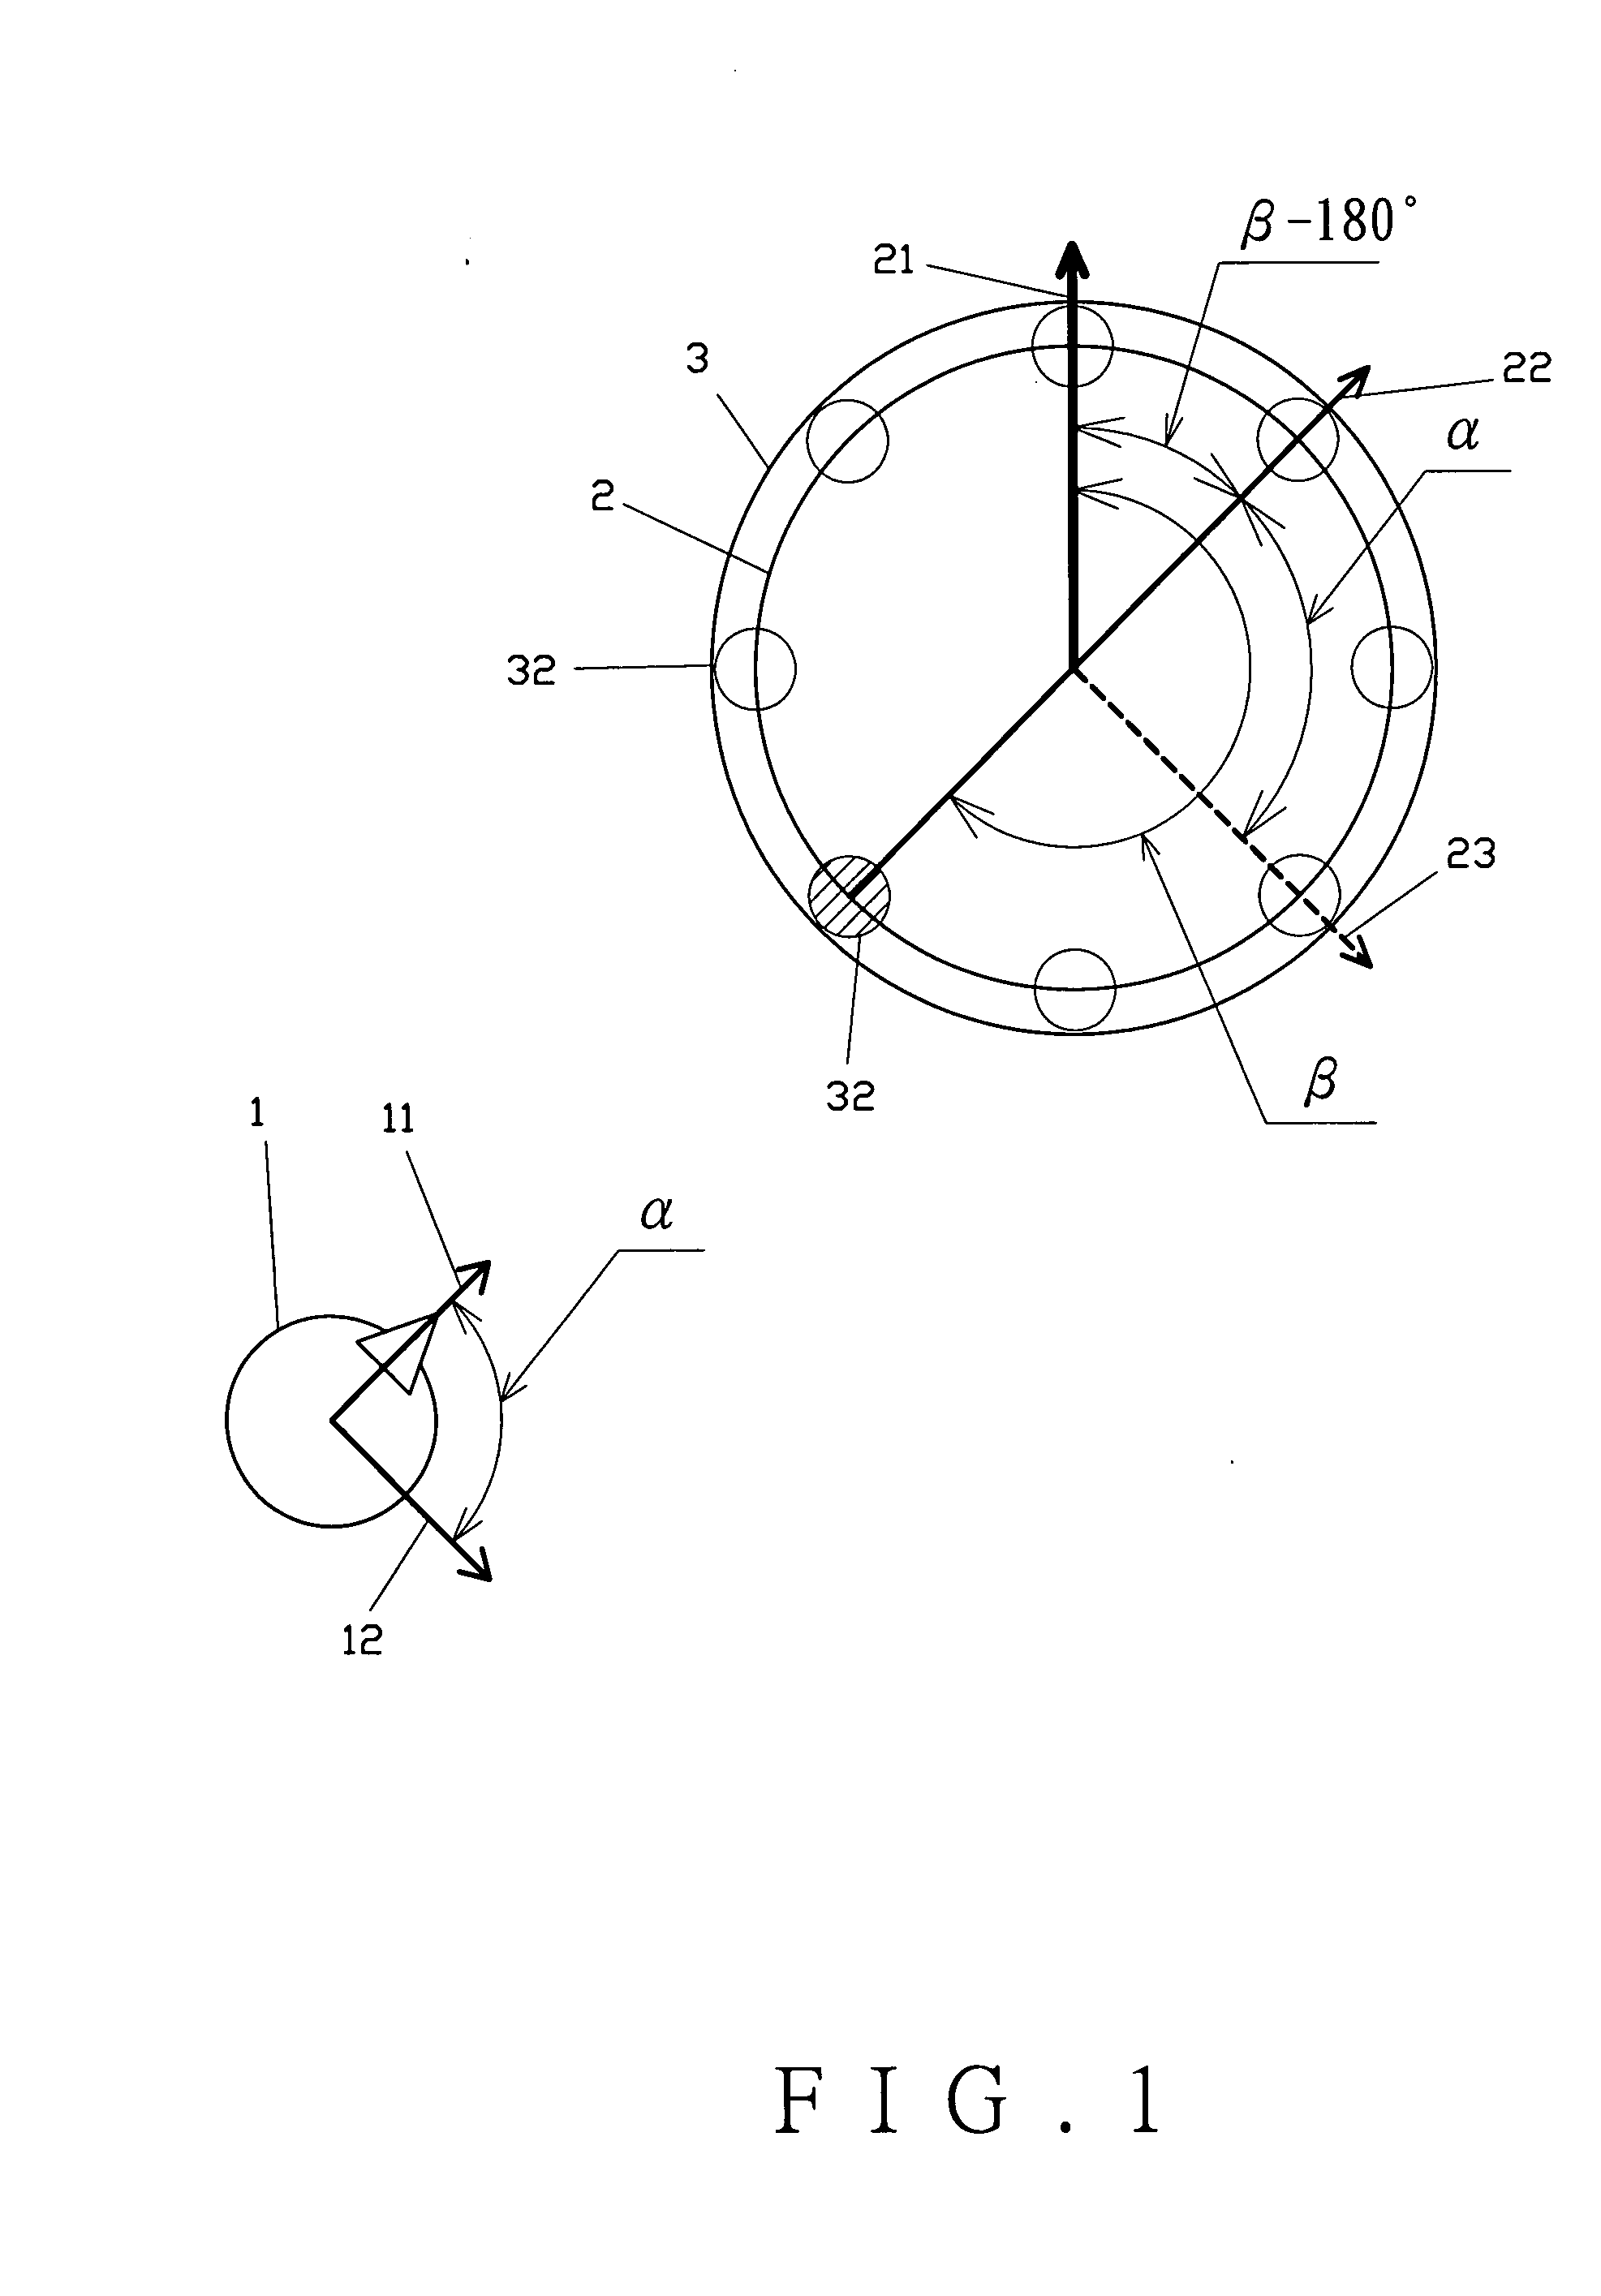 Remote control method for a motion heading by referring to a relative angle between a receiving end and a transmission end